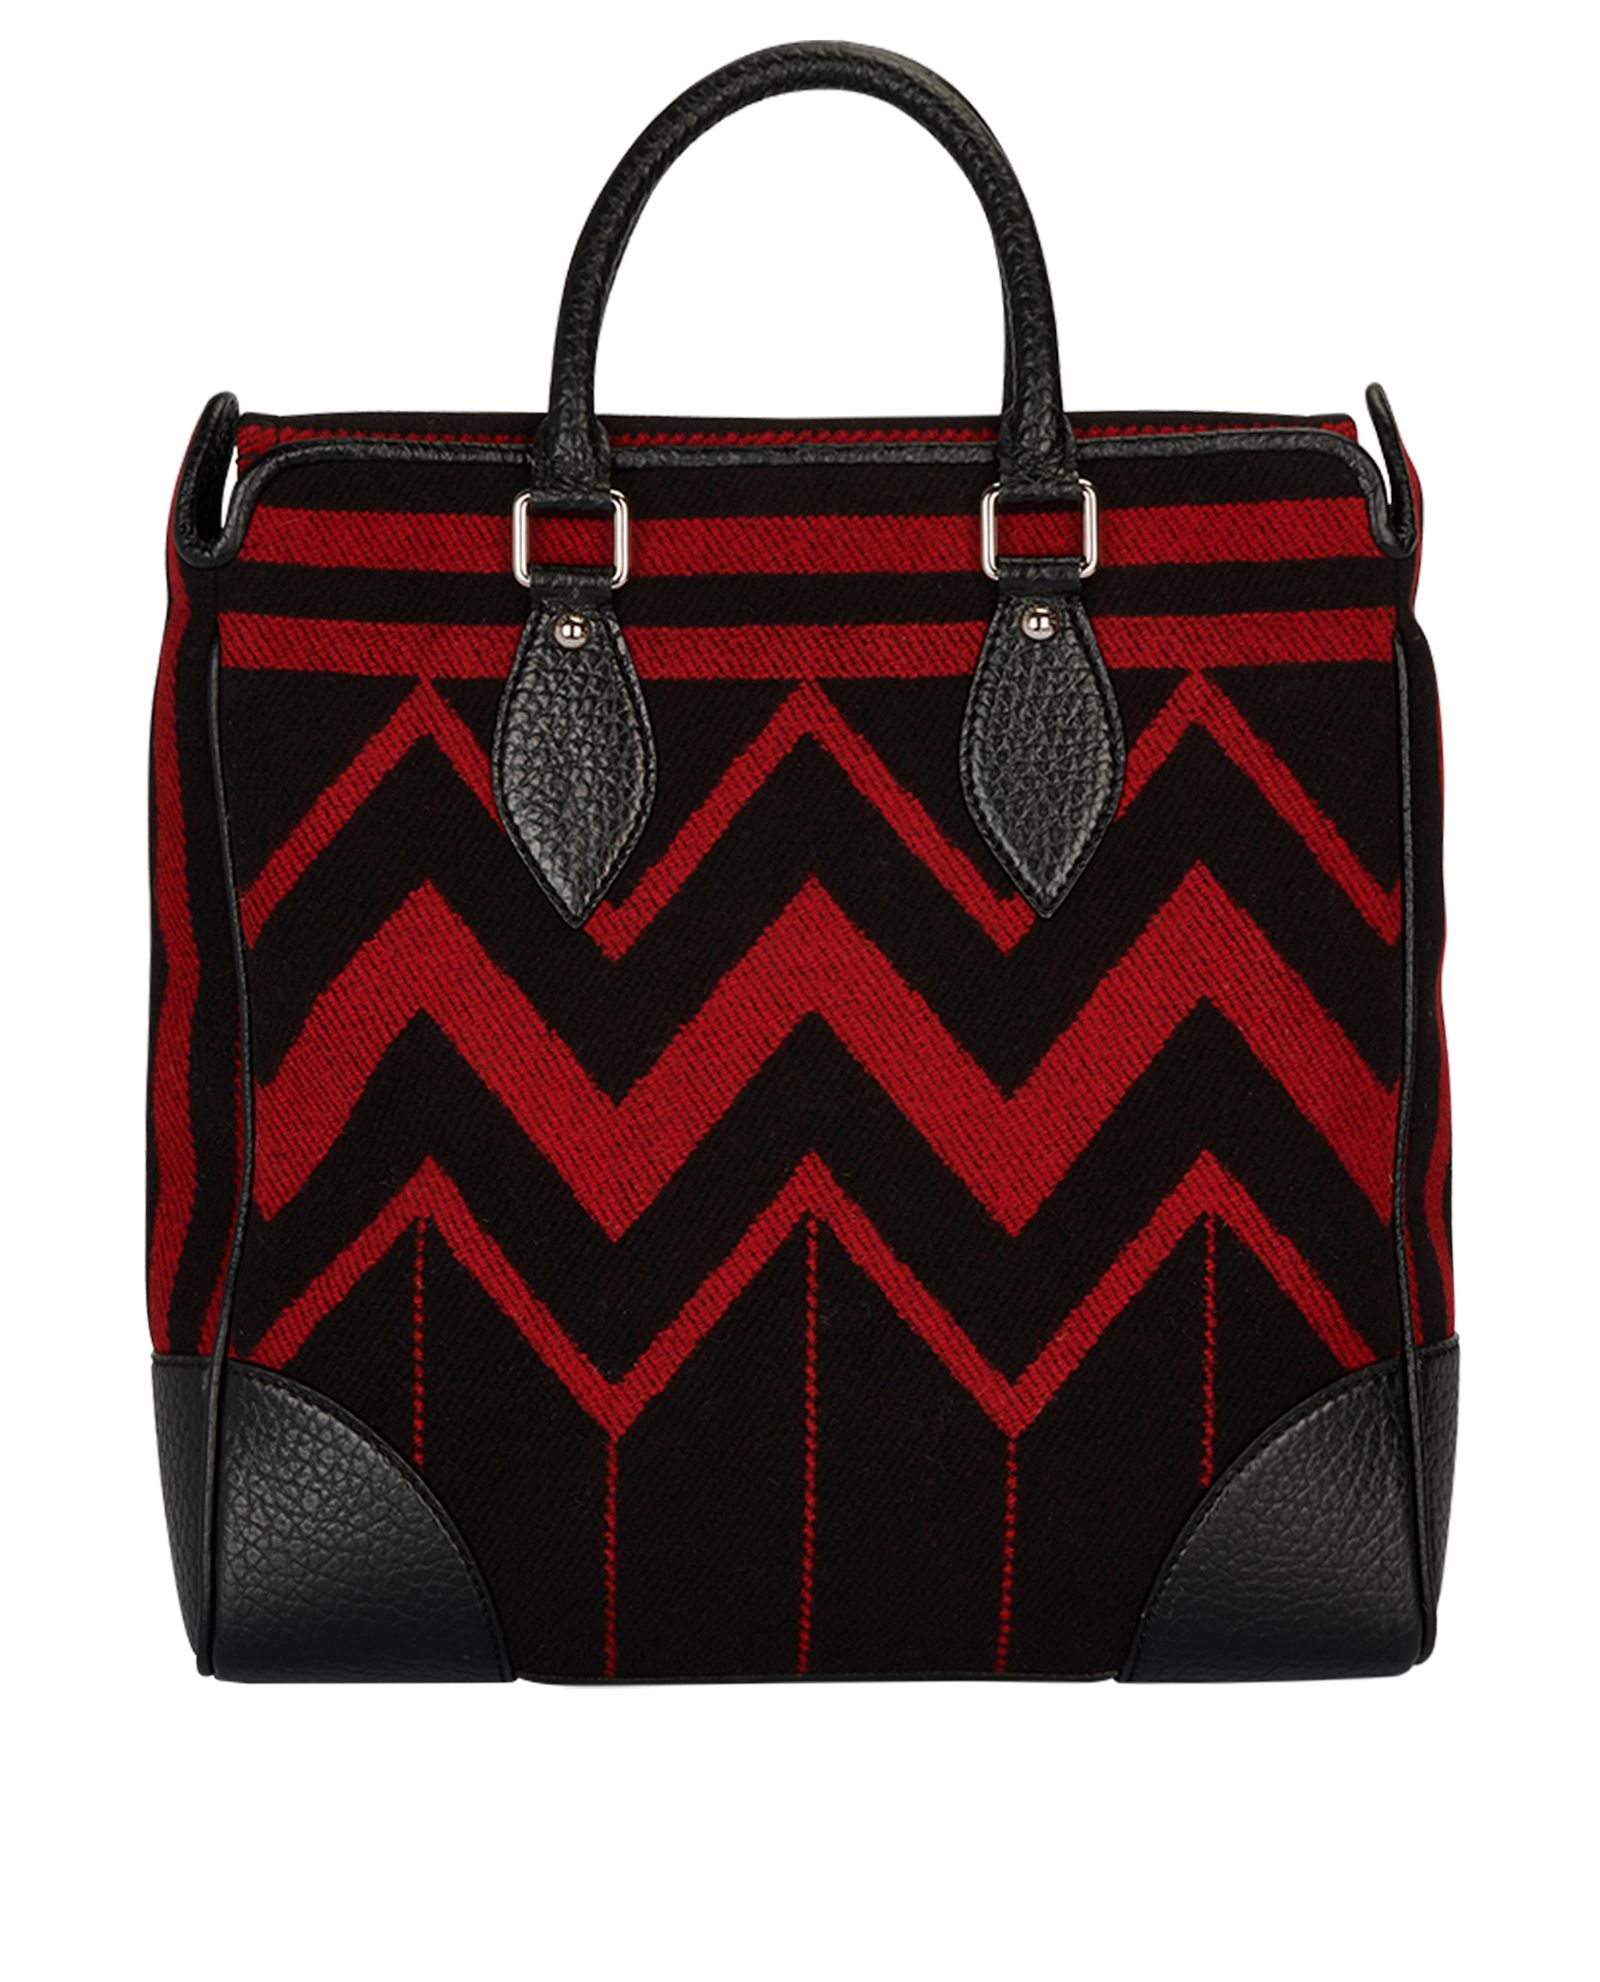 Louis Vuitton Limited Edition Vali Blanket Black & Red Bag 2006